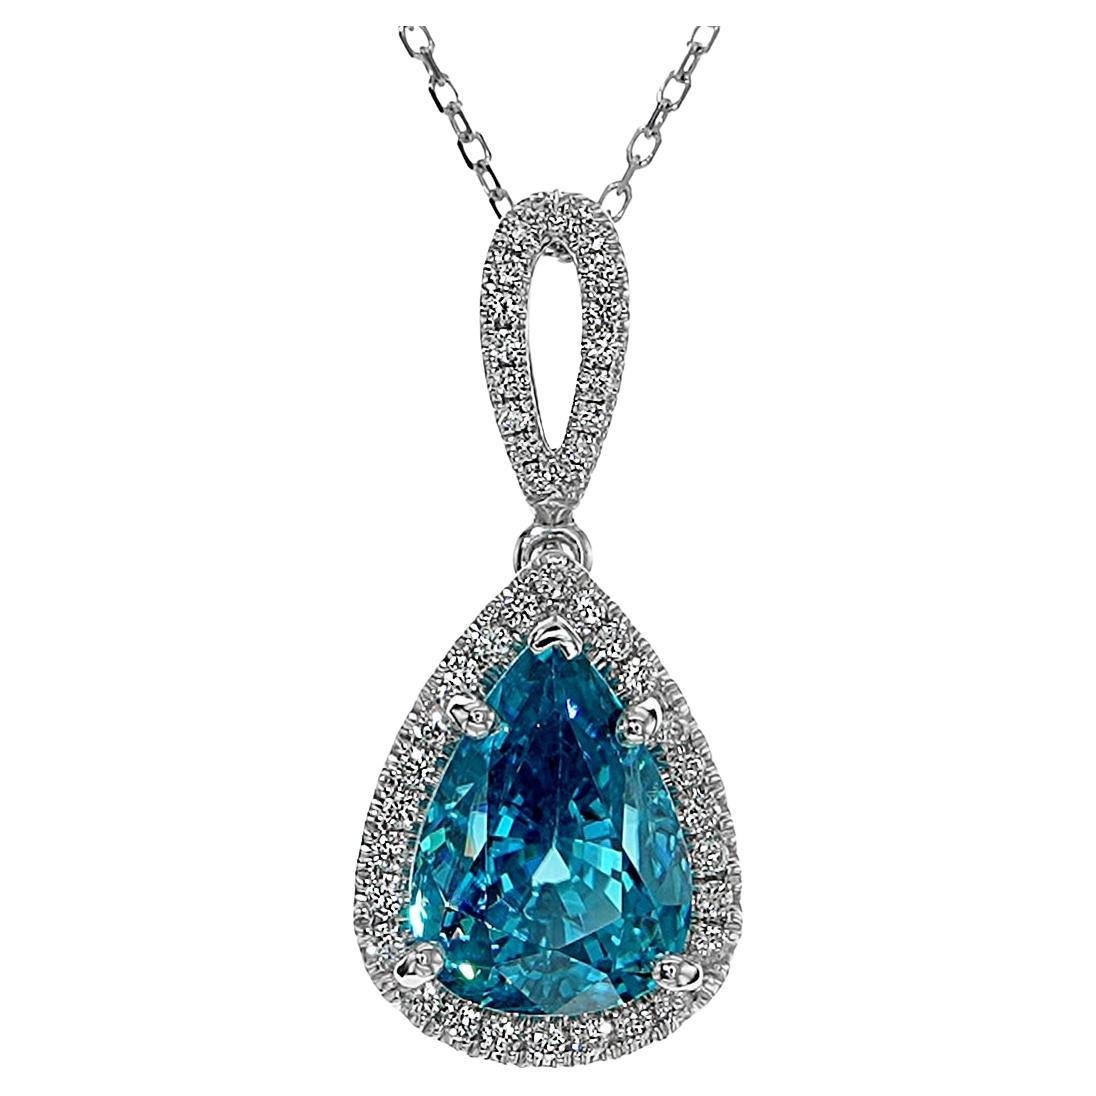 8.43 Carats Blue Zircon Pendant with 0.16 carats Diamonds and 14KWG Chain